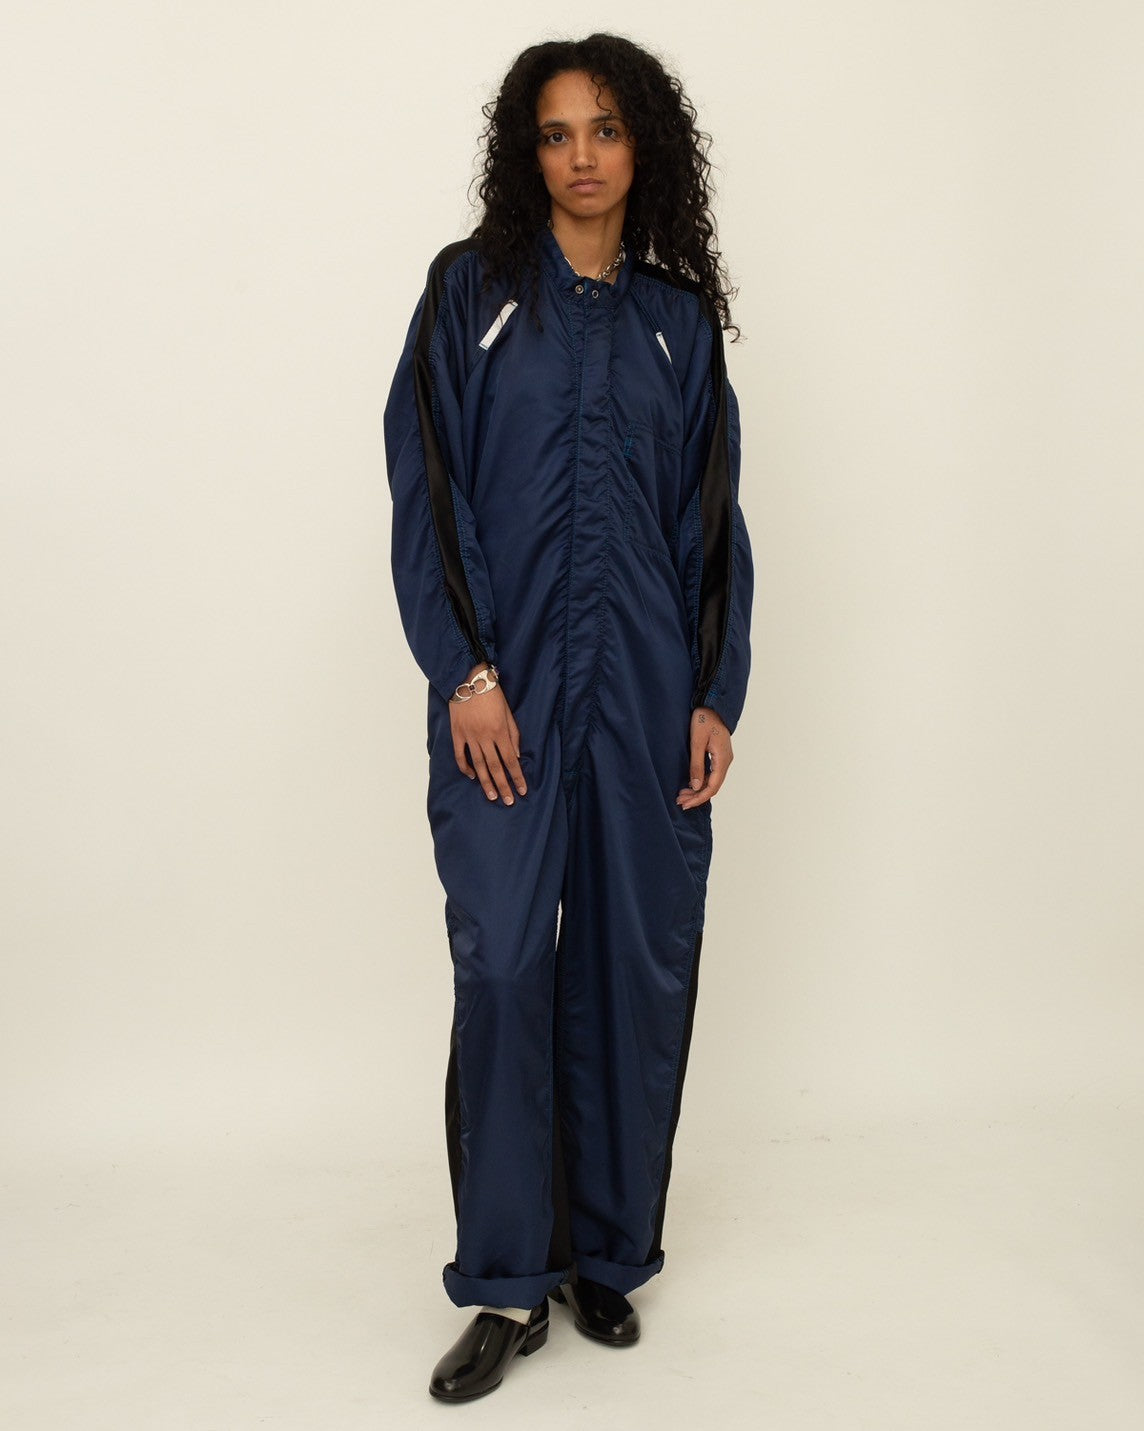 Universal Overall NOS Ripstop Nylon Jumpsuits